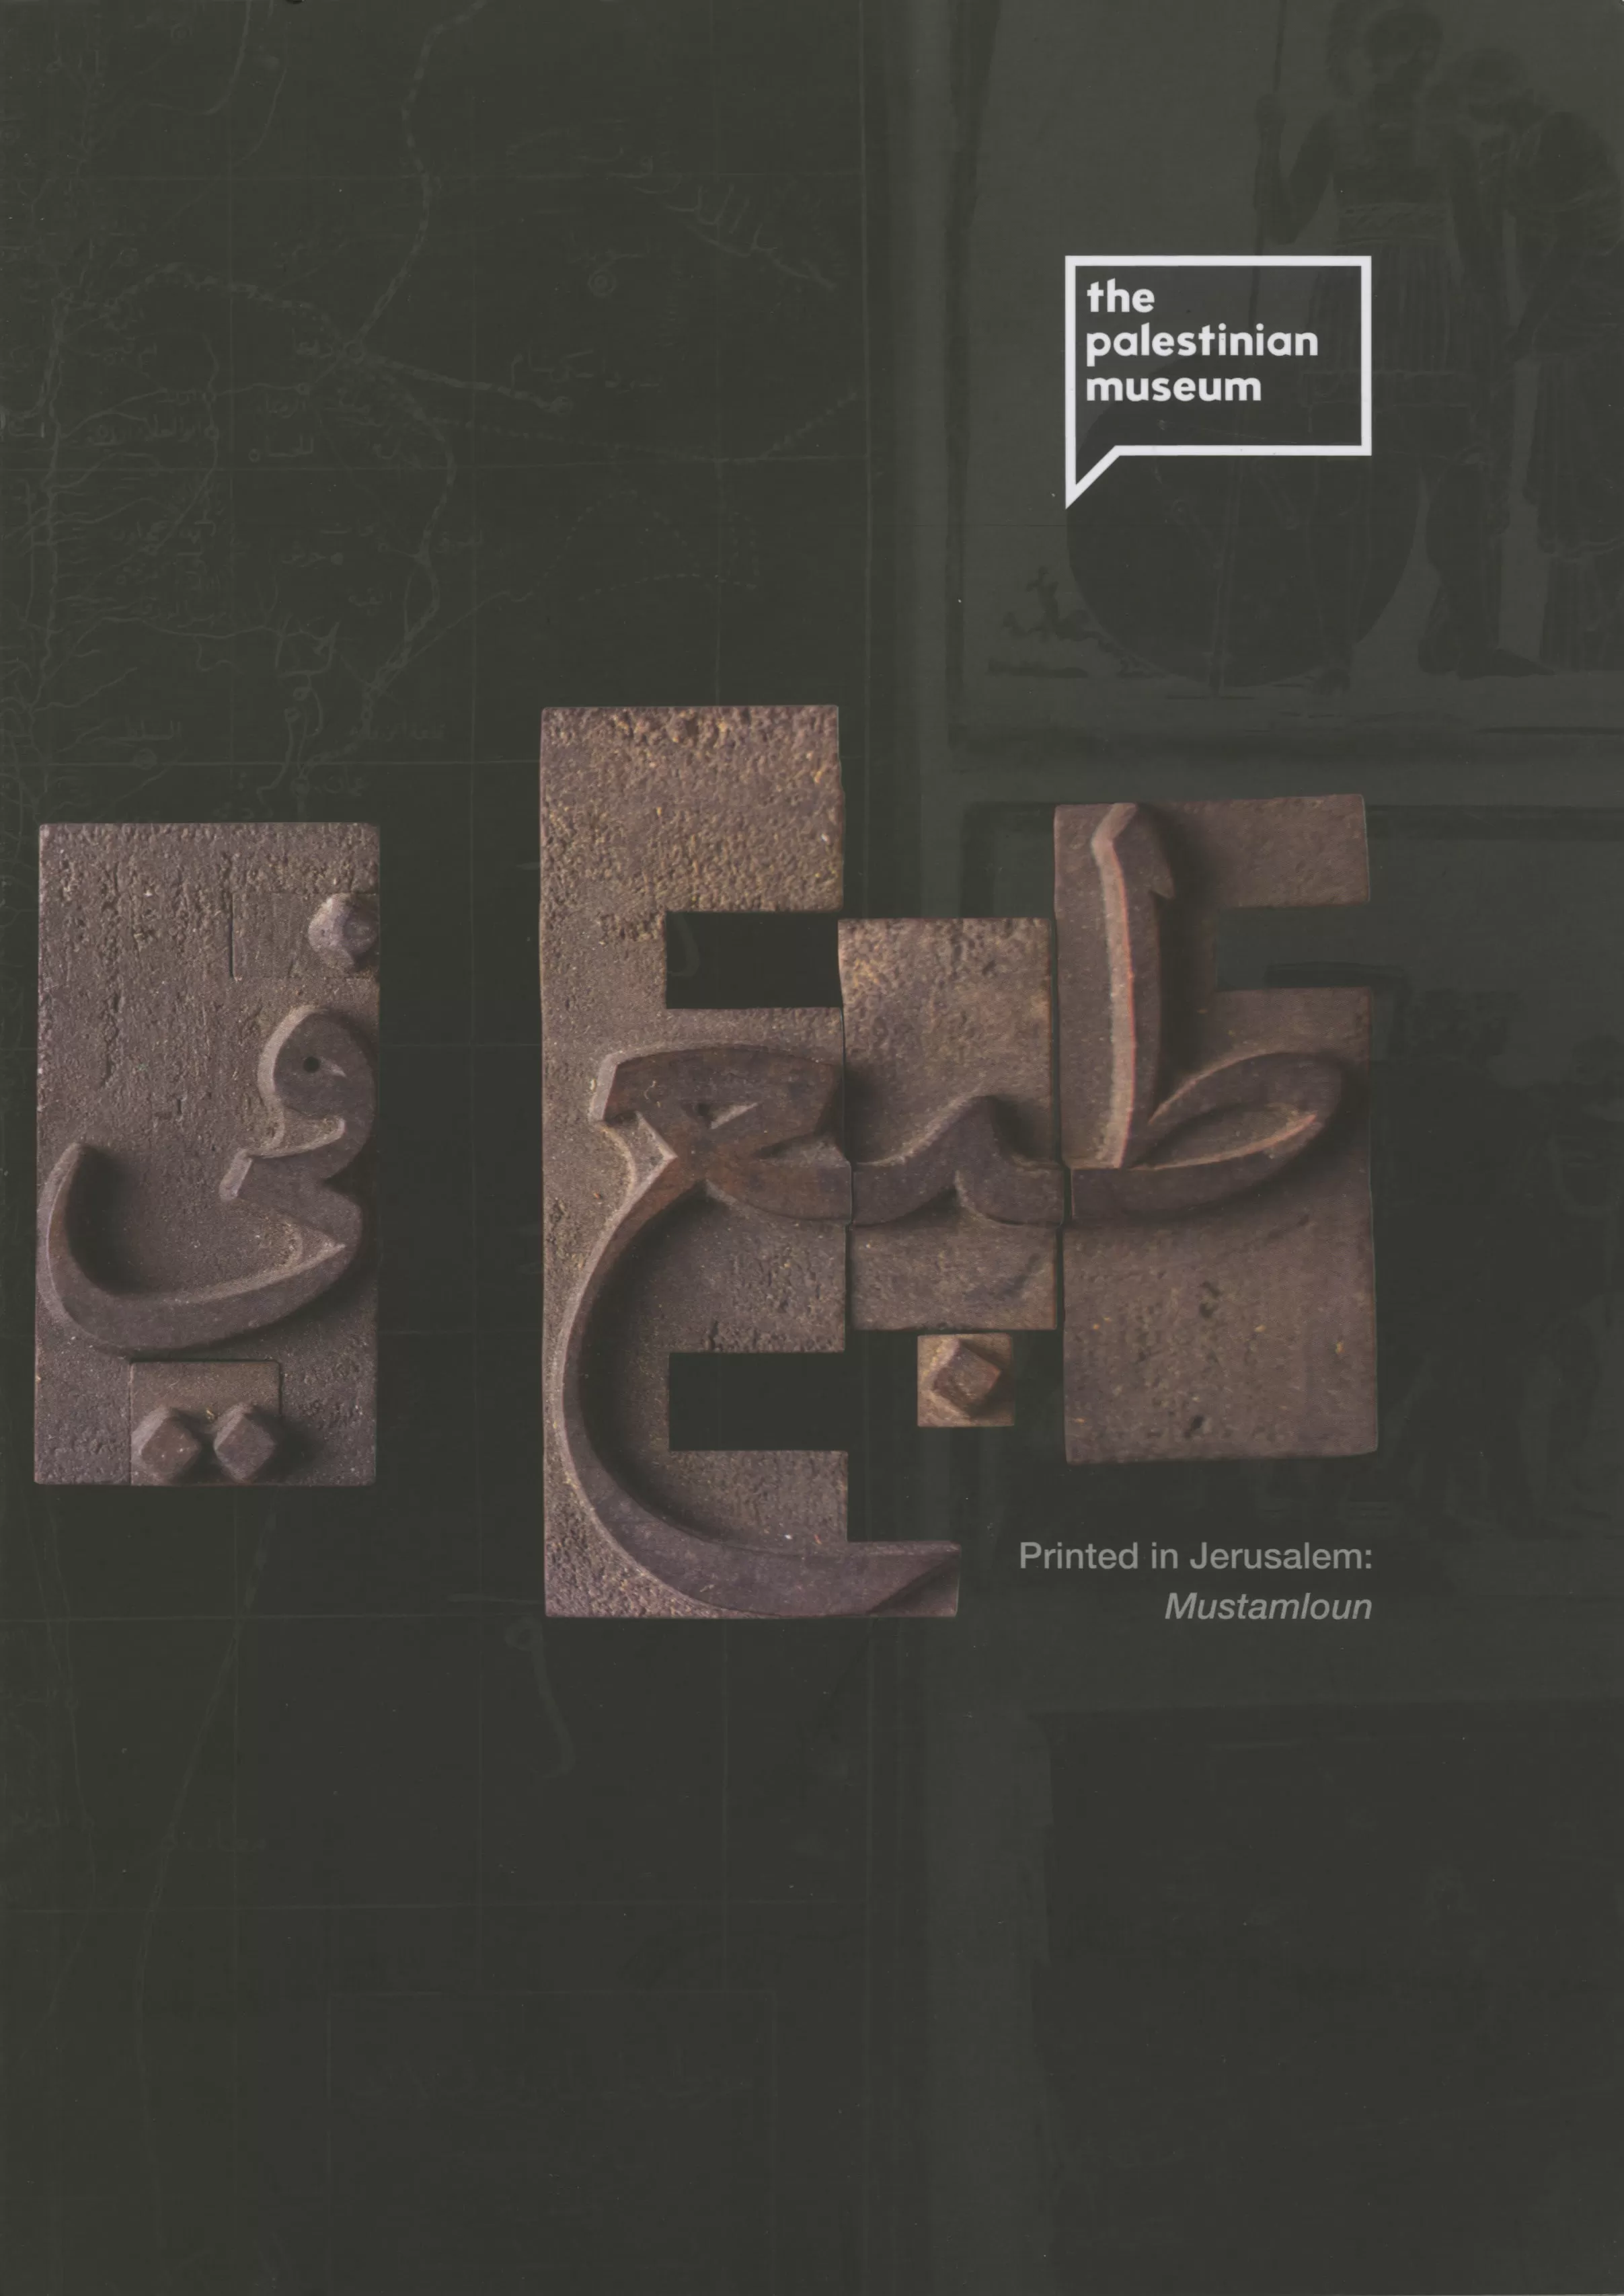 Book cover "Printed in Jerusalem: Mustamloun" (Exhibition catalogue)